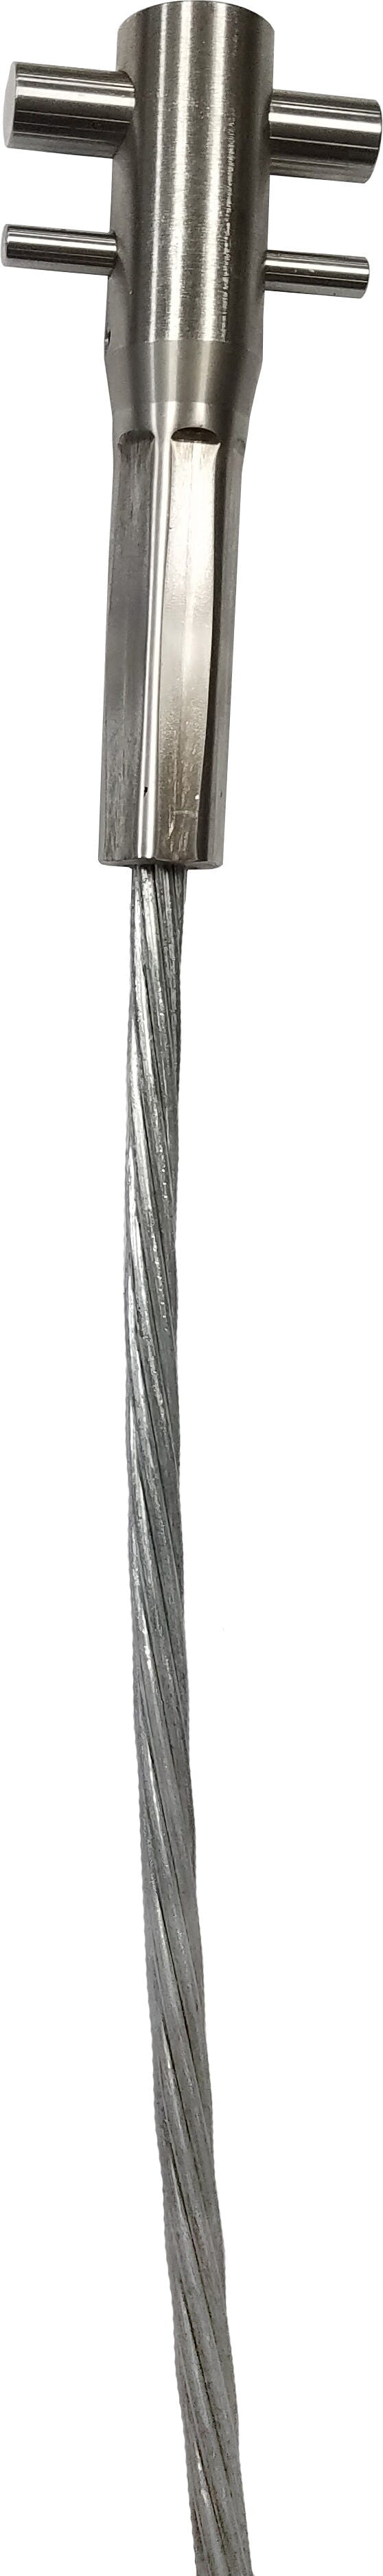 3M™ DBI-SALA® Lad-Saf™ Swaged Cable 6115011, 3/8 Inch, Stainless Steel, 3m_0